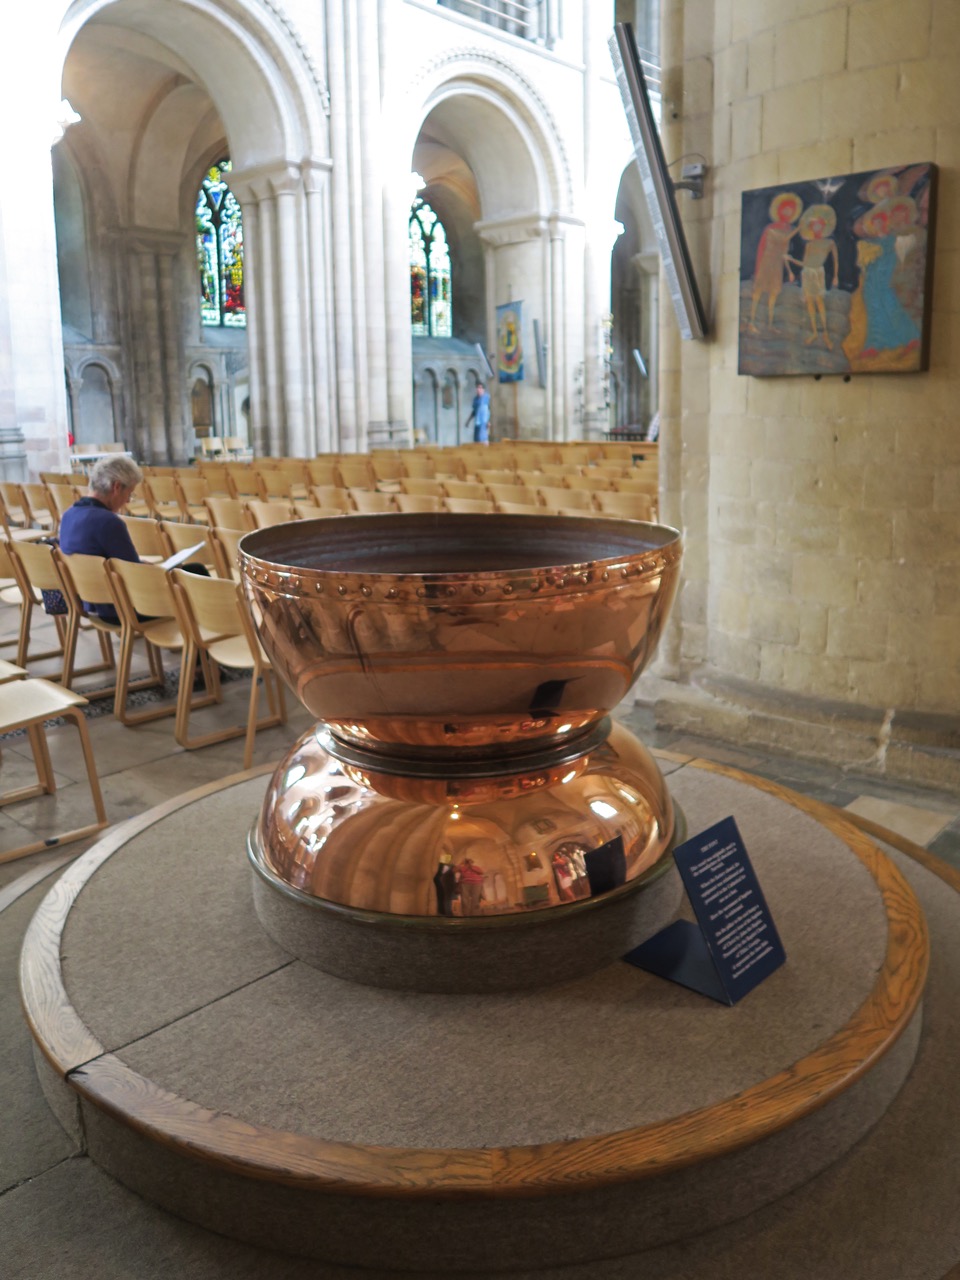 Baptismal font, made from a copper bowl from the former chocolate factory Rowntree (after 1994)